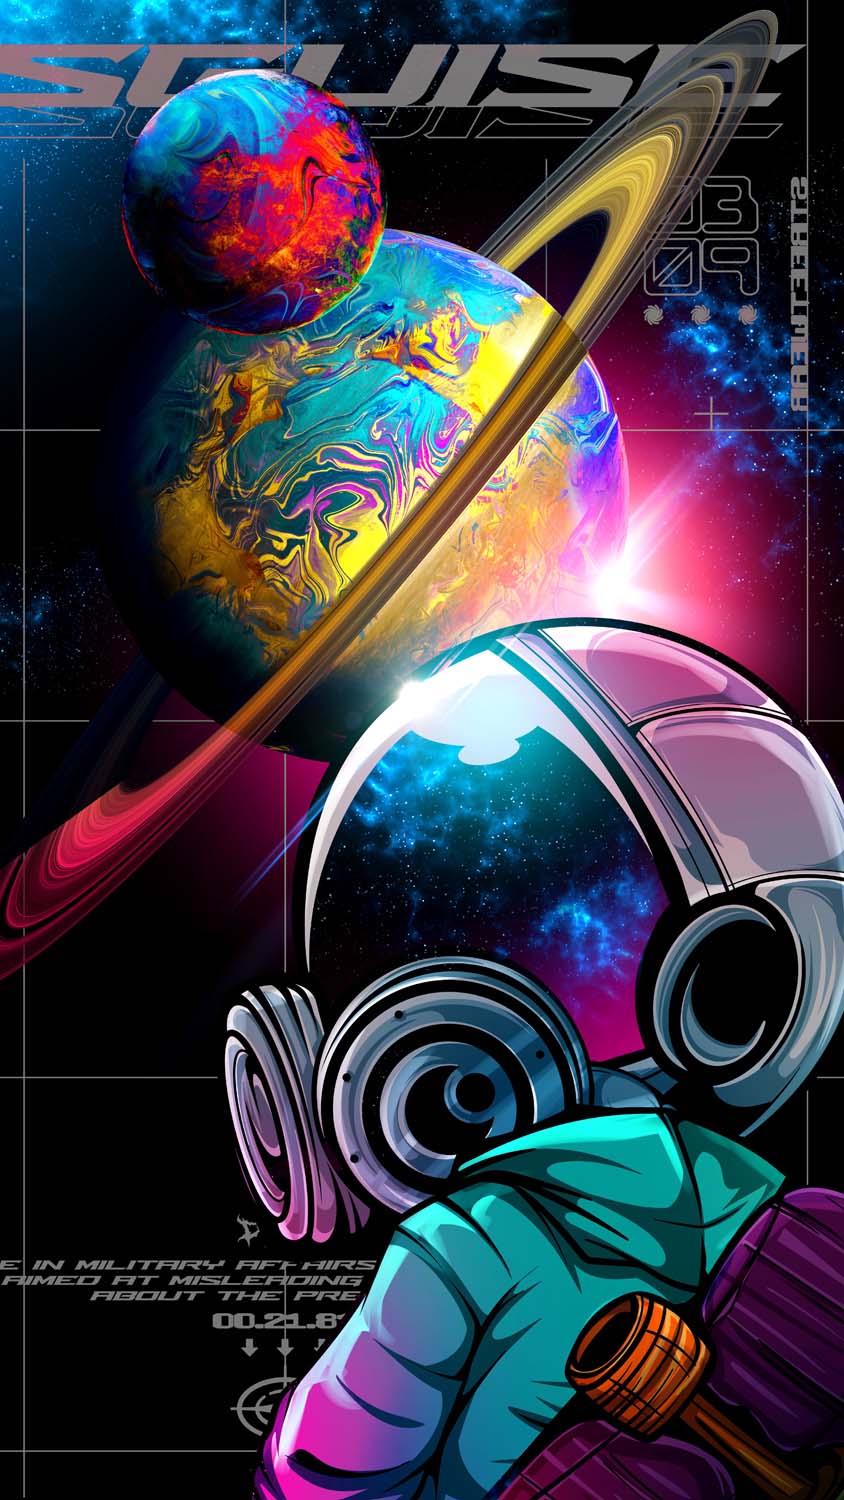 Spaced Out Astro Wallpapers